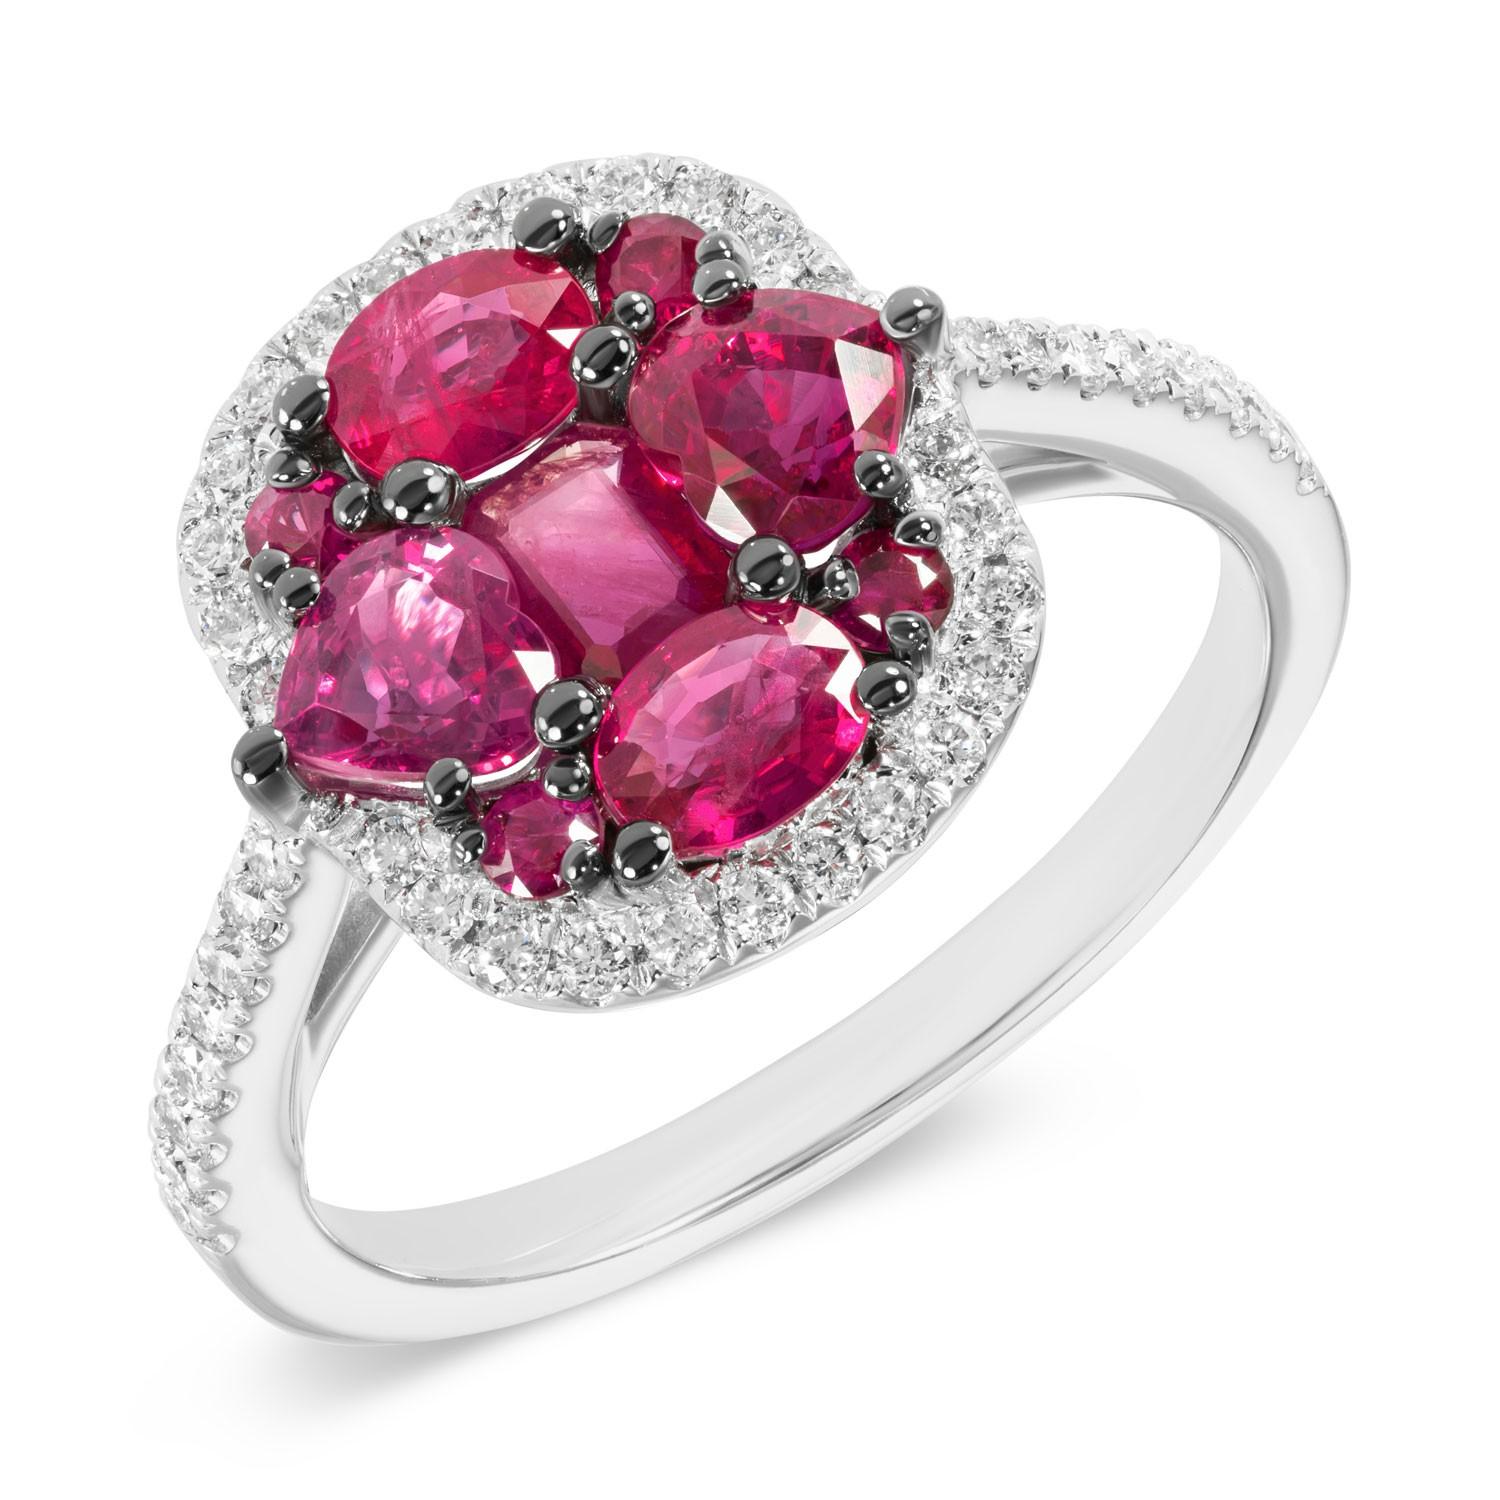 Ring White Gold 14 K (Matching Earrings Available)
Diamond 42-RND 57-0,24-4/6
Ruby 4-RND 0,03 (5)/4
Ruby 2-Oval-0,27 (5)/4
Ruby 2-1,02 (5)/4
Ruby 1-0,16 (5)/4
Weight 4,09 grams
Size 17,2

With a heritage of ancient fine Swiss jewelry traditions,